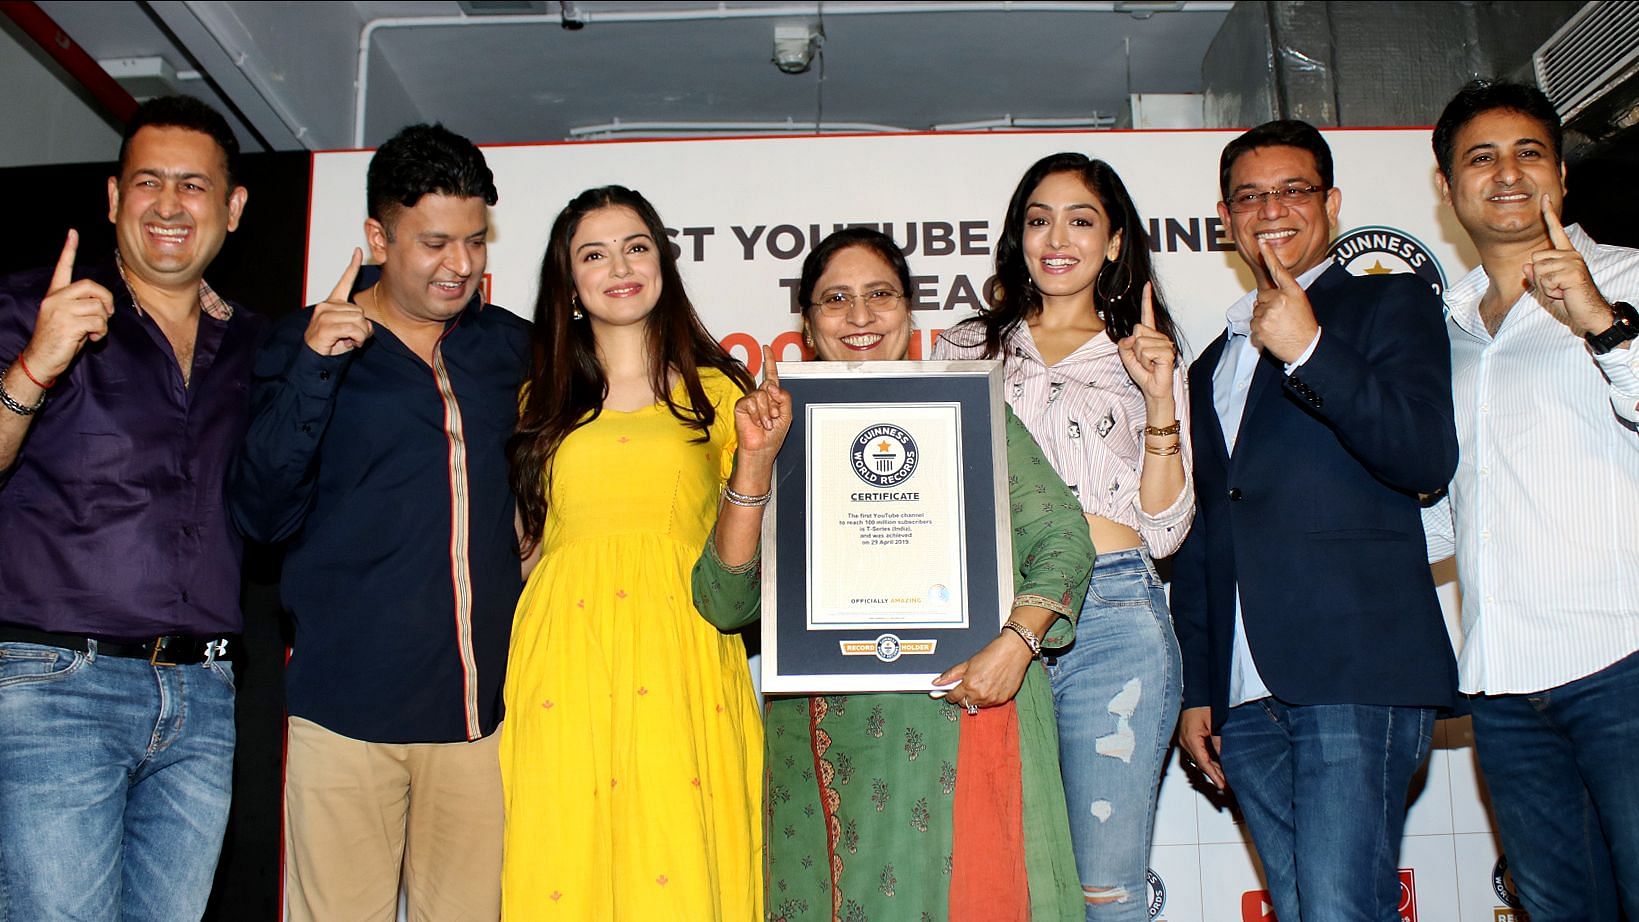 T-Series CMD Bhushan Kumar receives official certificate from Guiness World Records  for becoming the ‘First YouTube Channel to reach 100 million subscribers.’